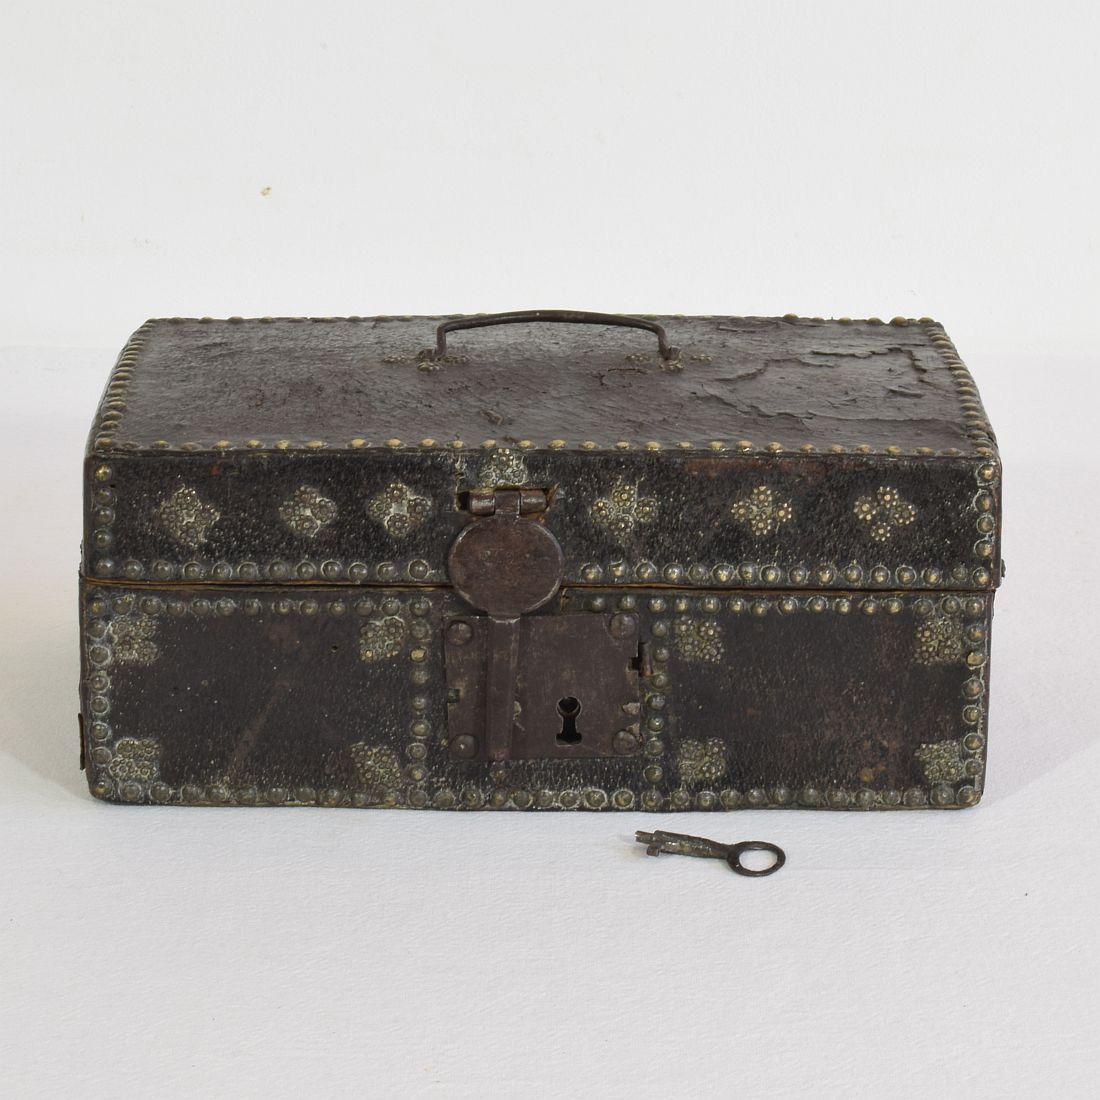 Extremely old box that is covered with leather and decorated with iron and brass. 
Rare find with original and working key and lock,
France, circa 1600-1700
Weathered and some losses.
 